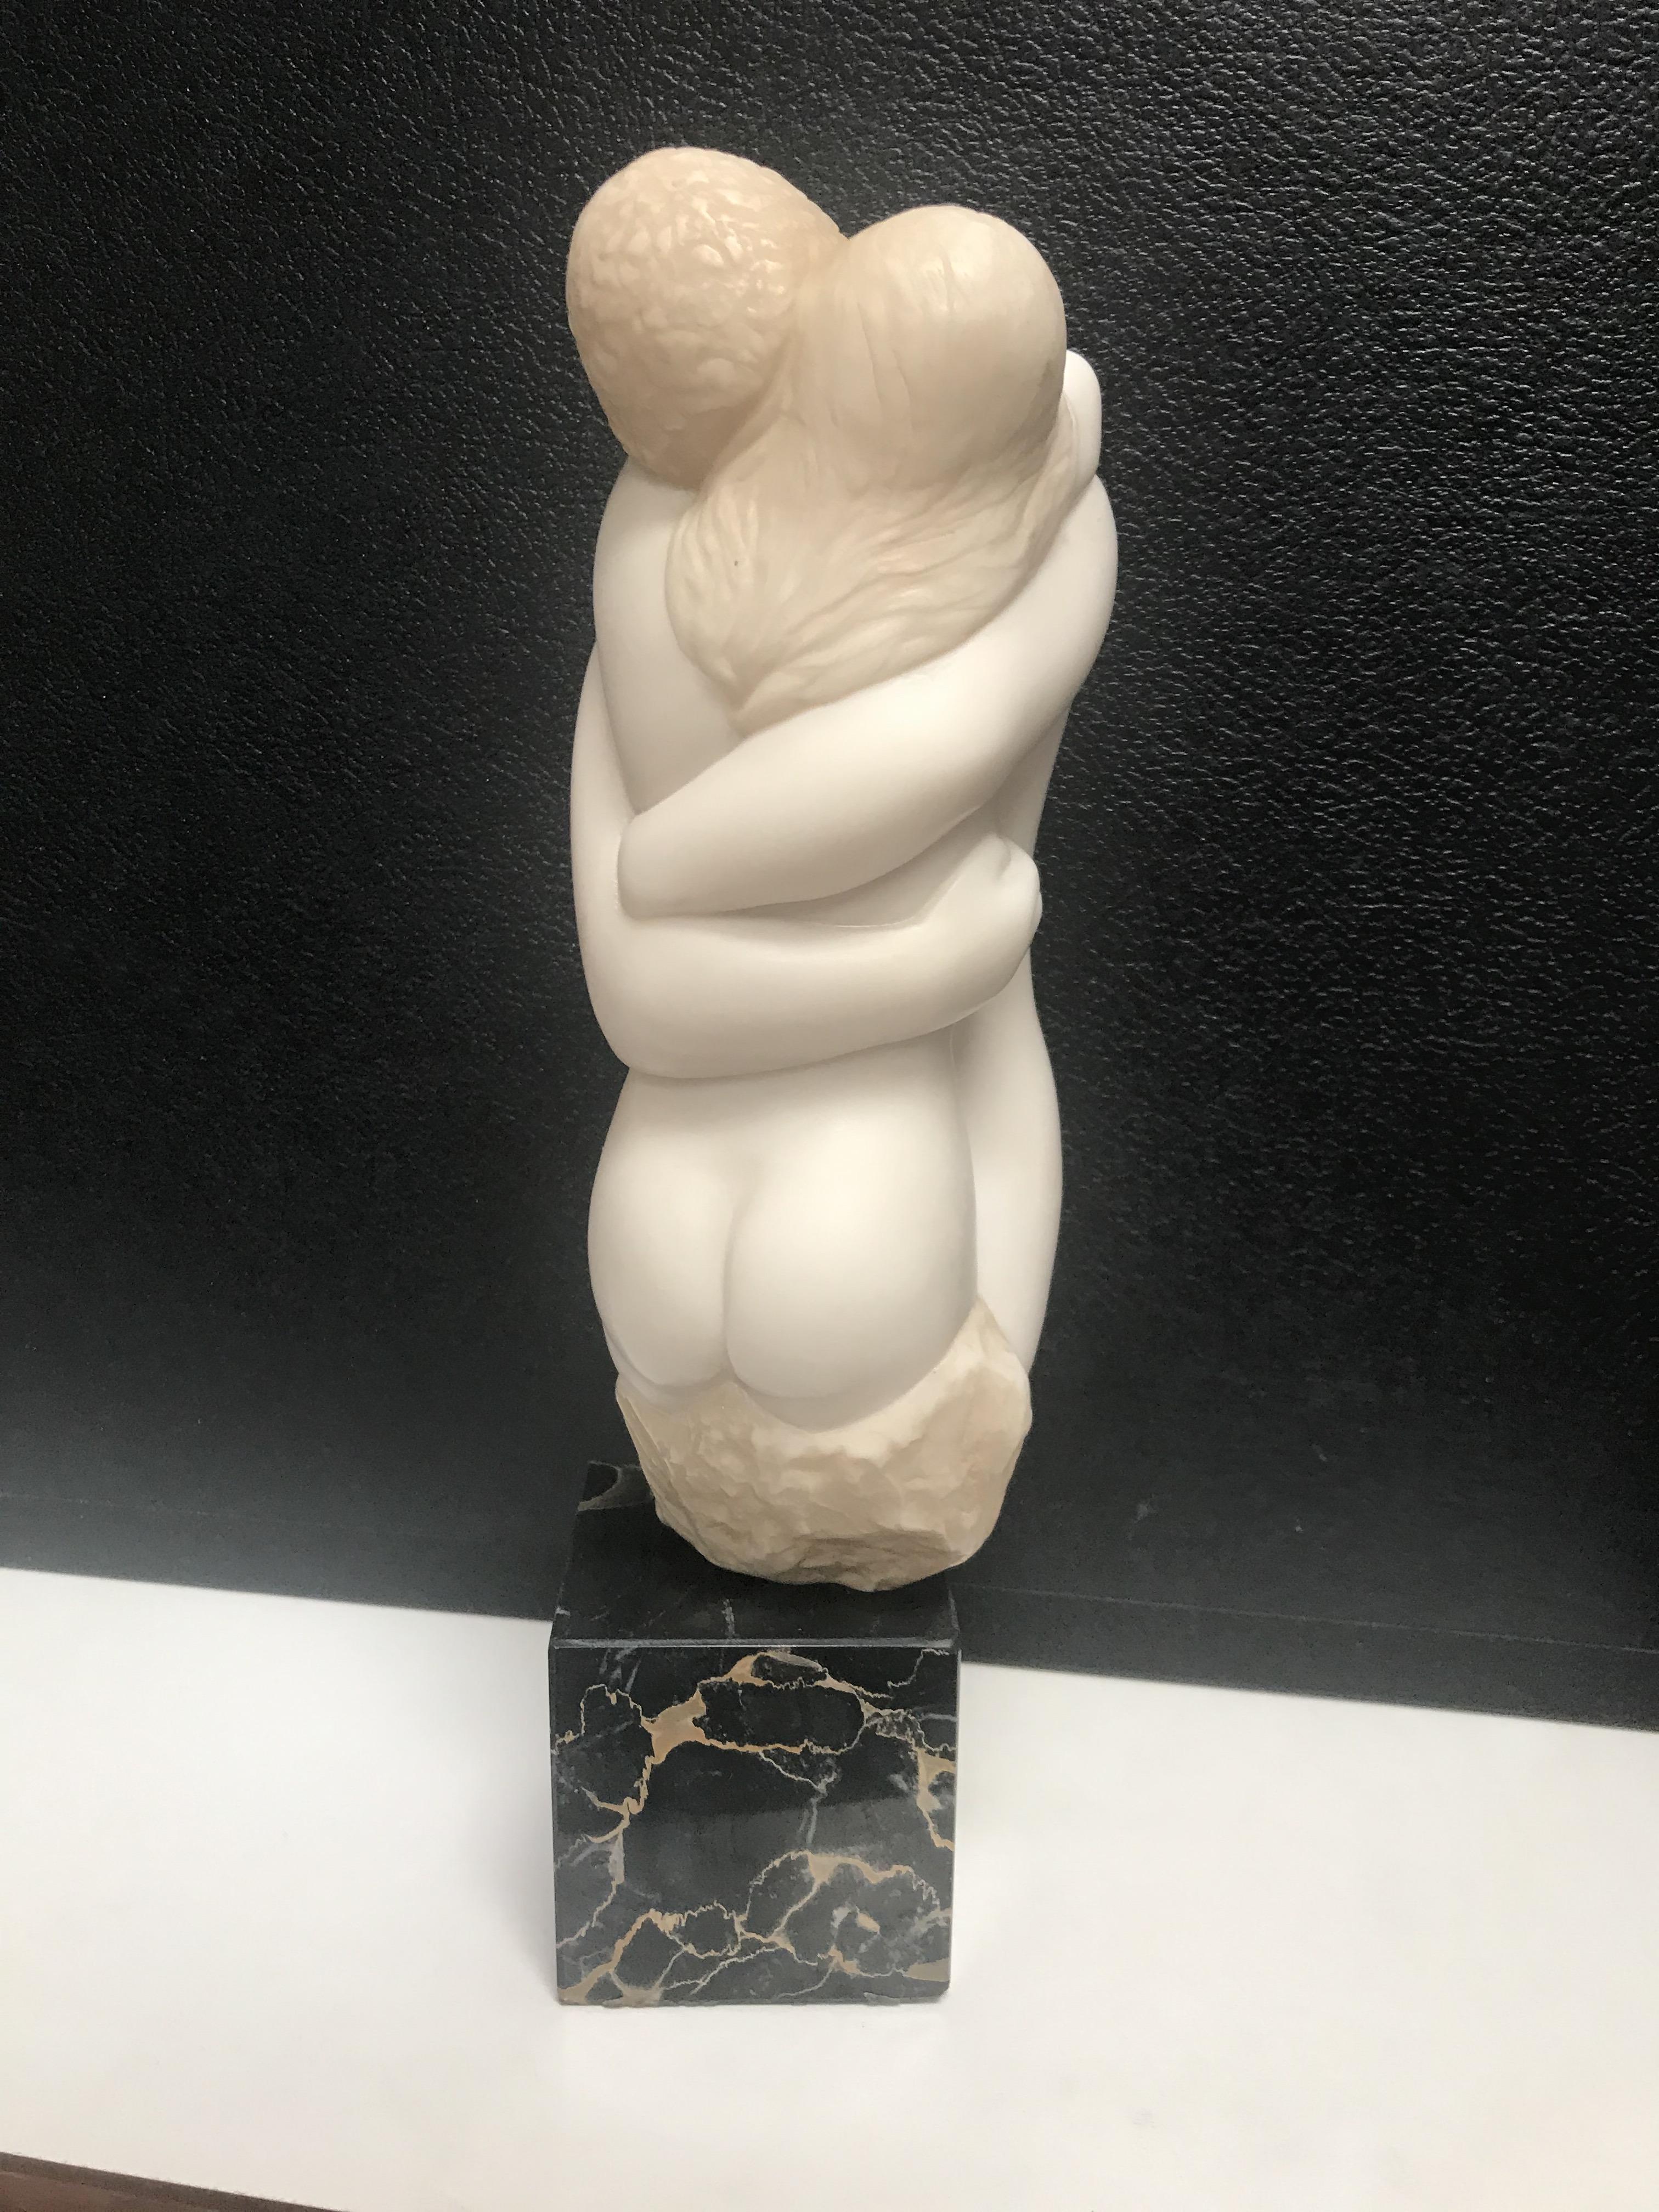 American Resin Sculpture of an Embracing Couple/